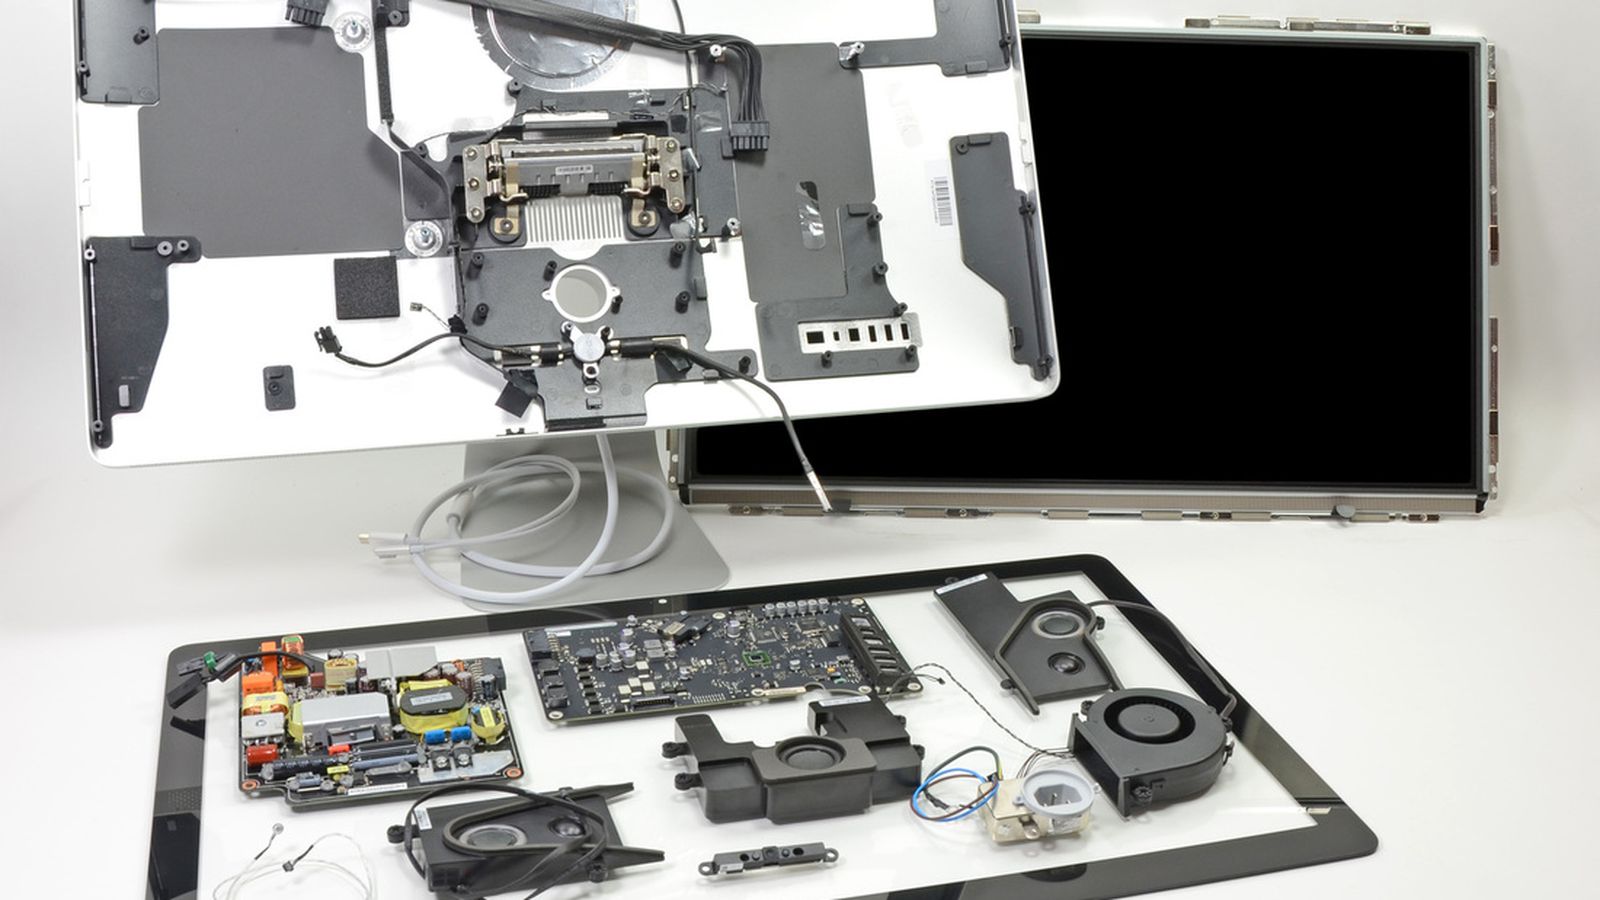 Apple 27-inch Thunderbolt Display torn down at iFixit - The Verge